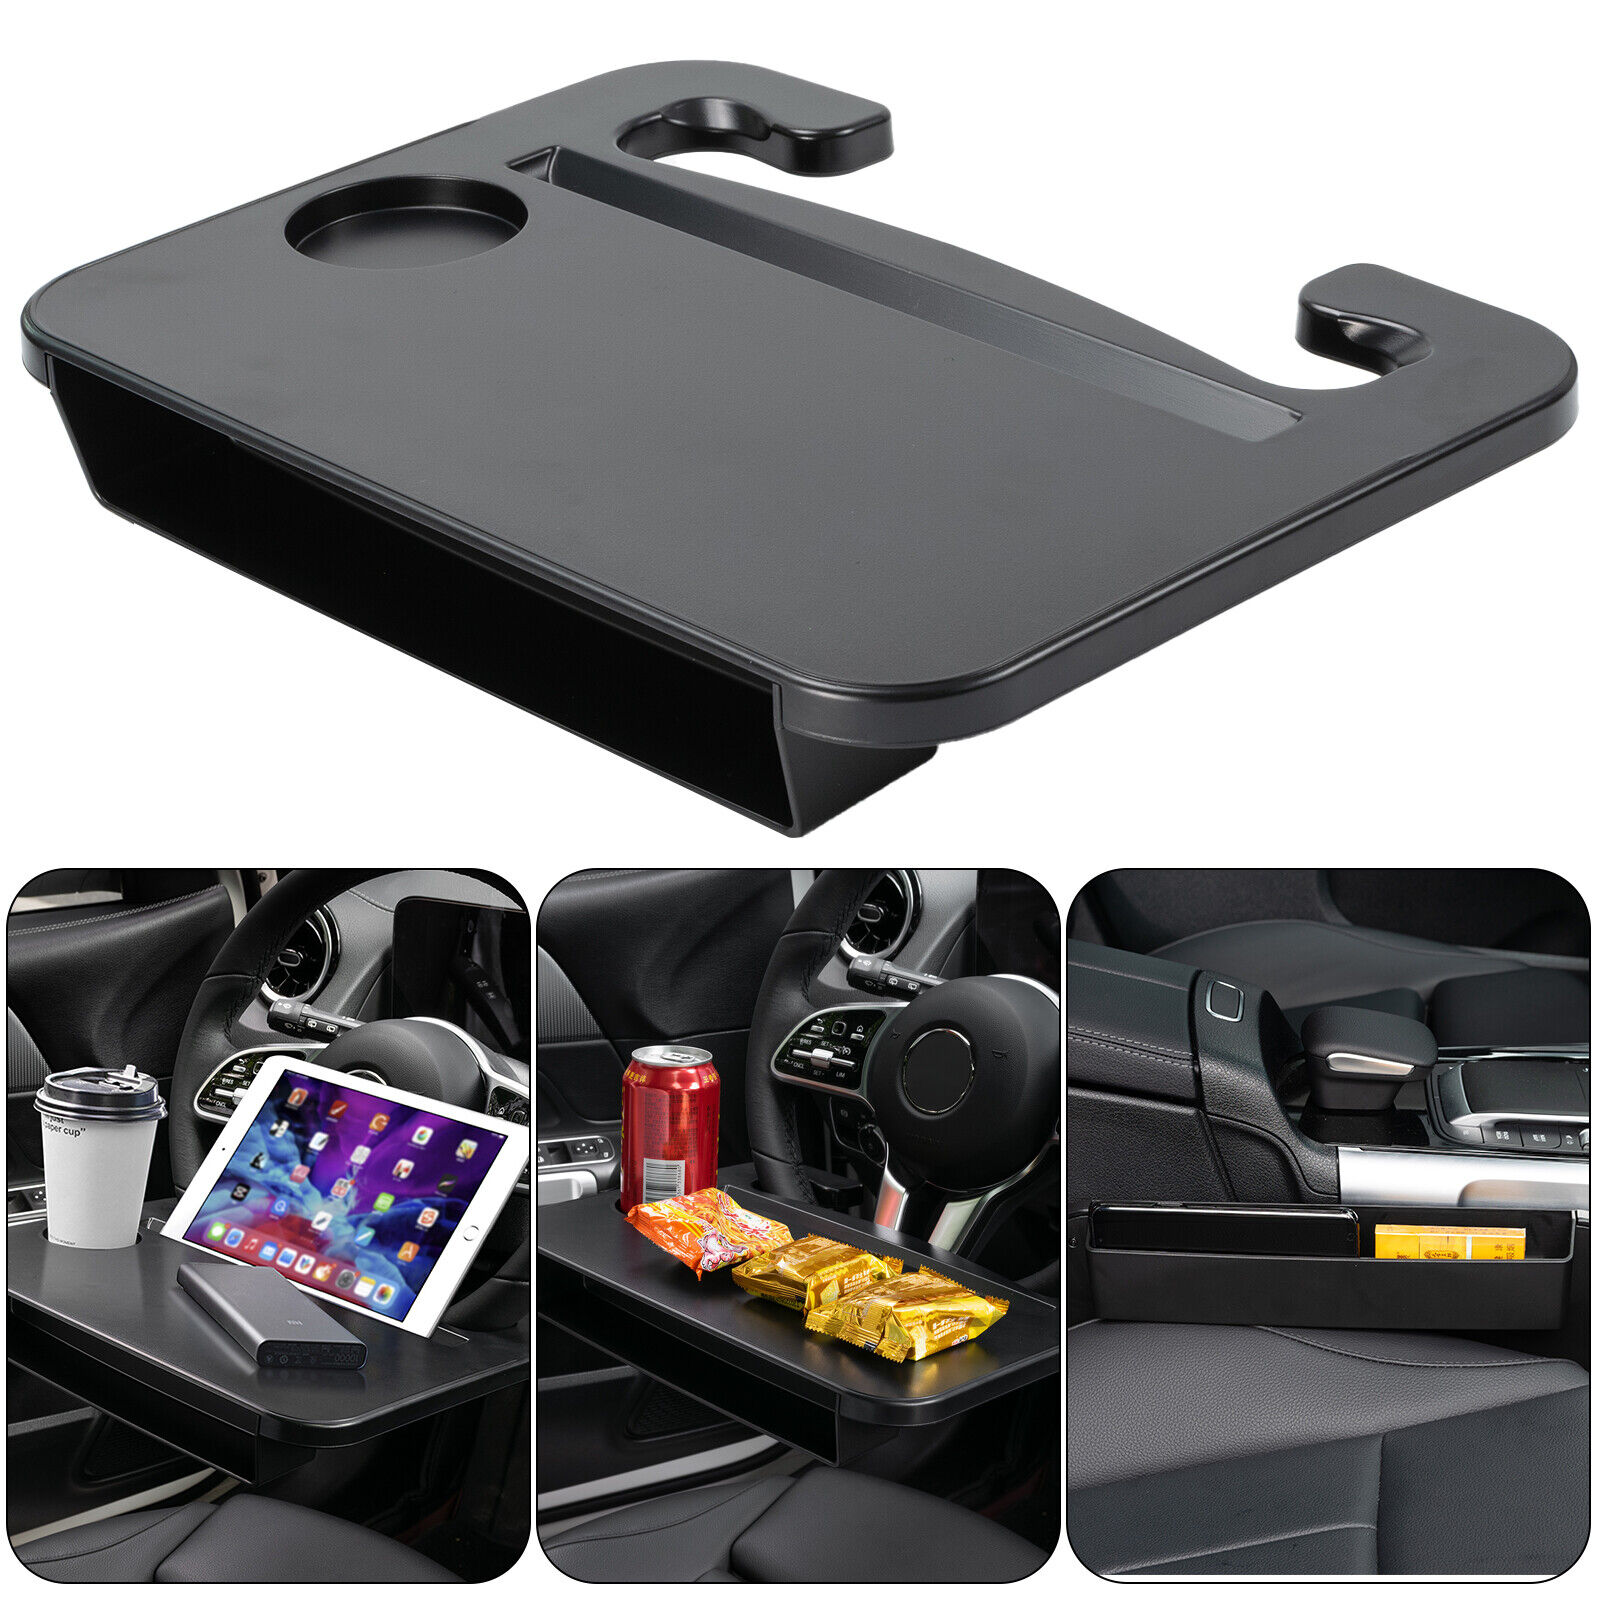 2 in 1 Car Steering Wheel Desk Tray For Laptop Drink Work Table Holder Food Tray